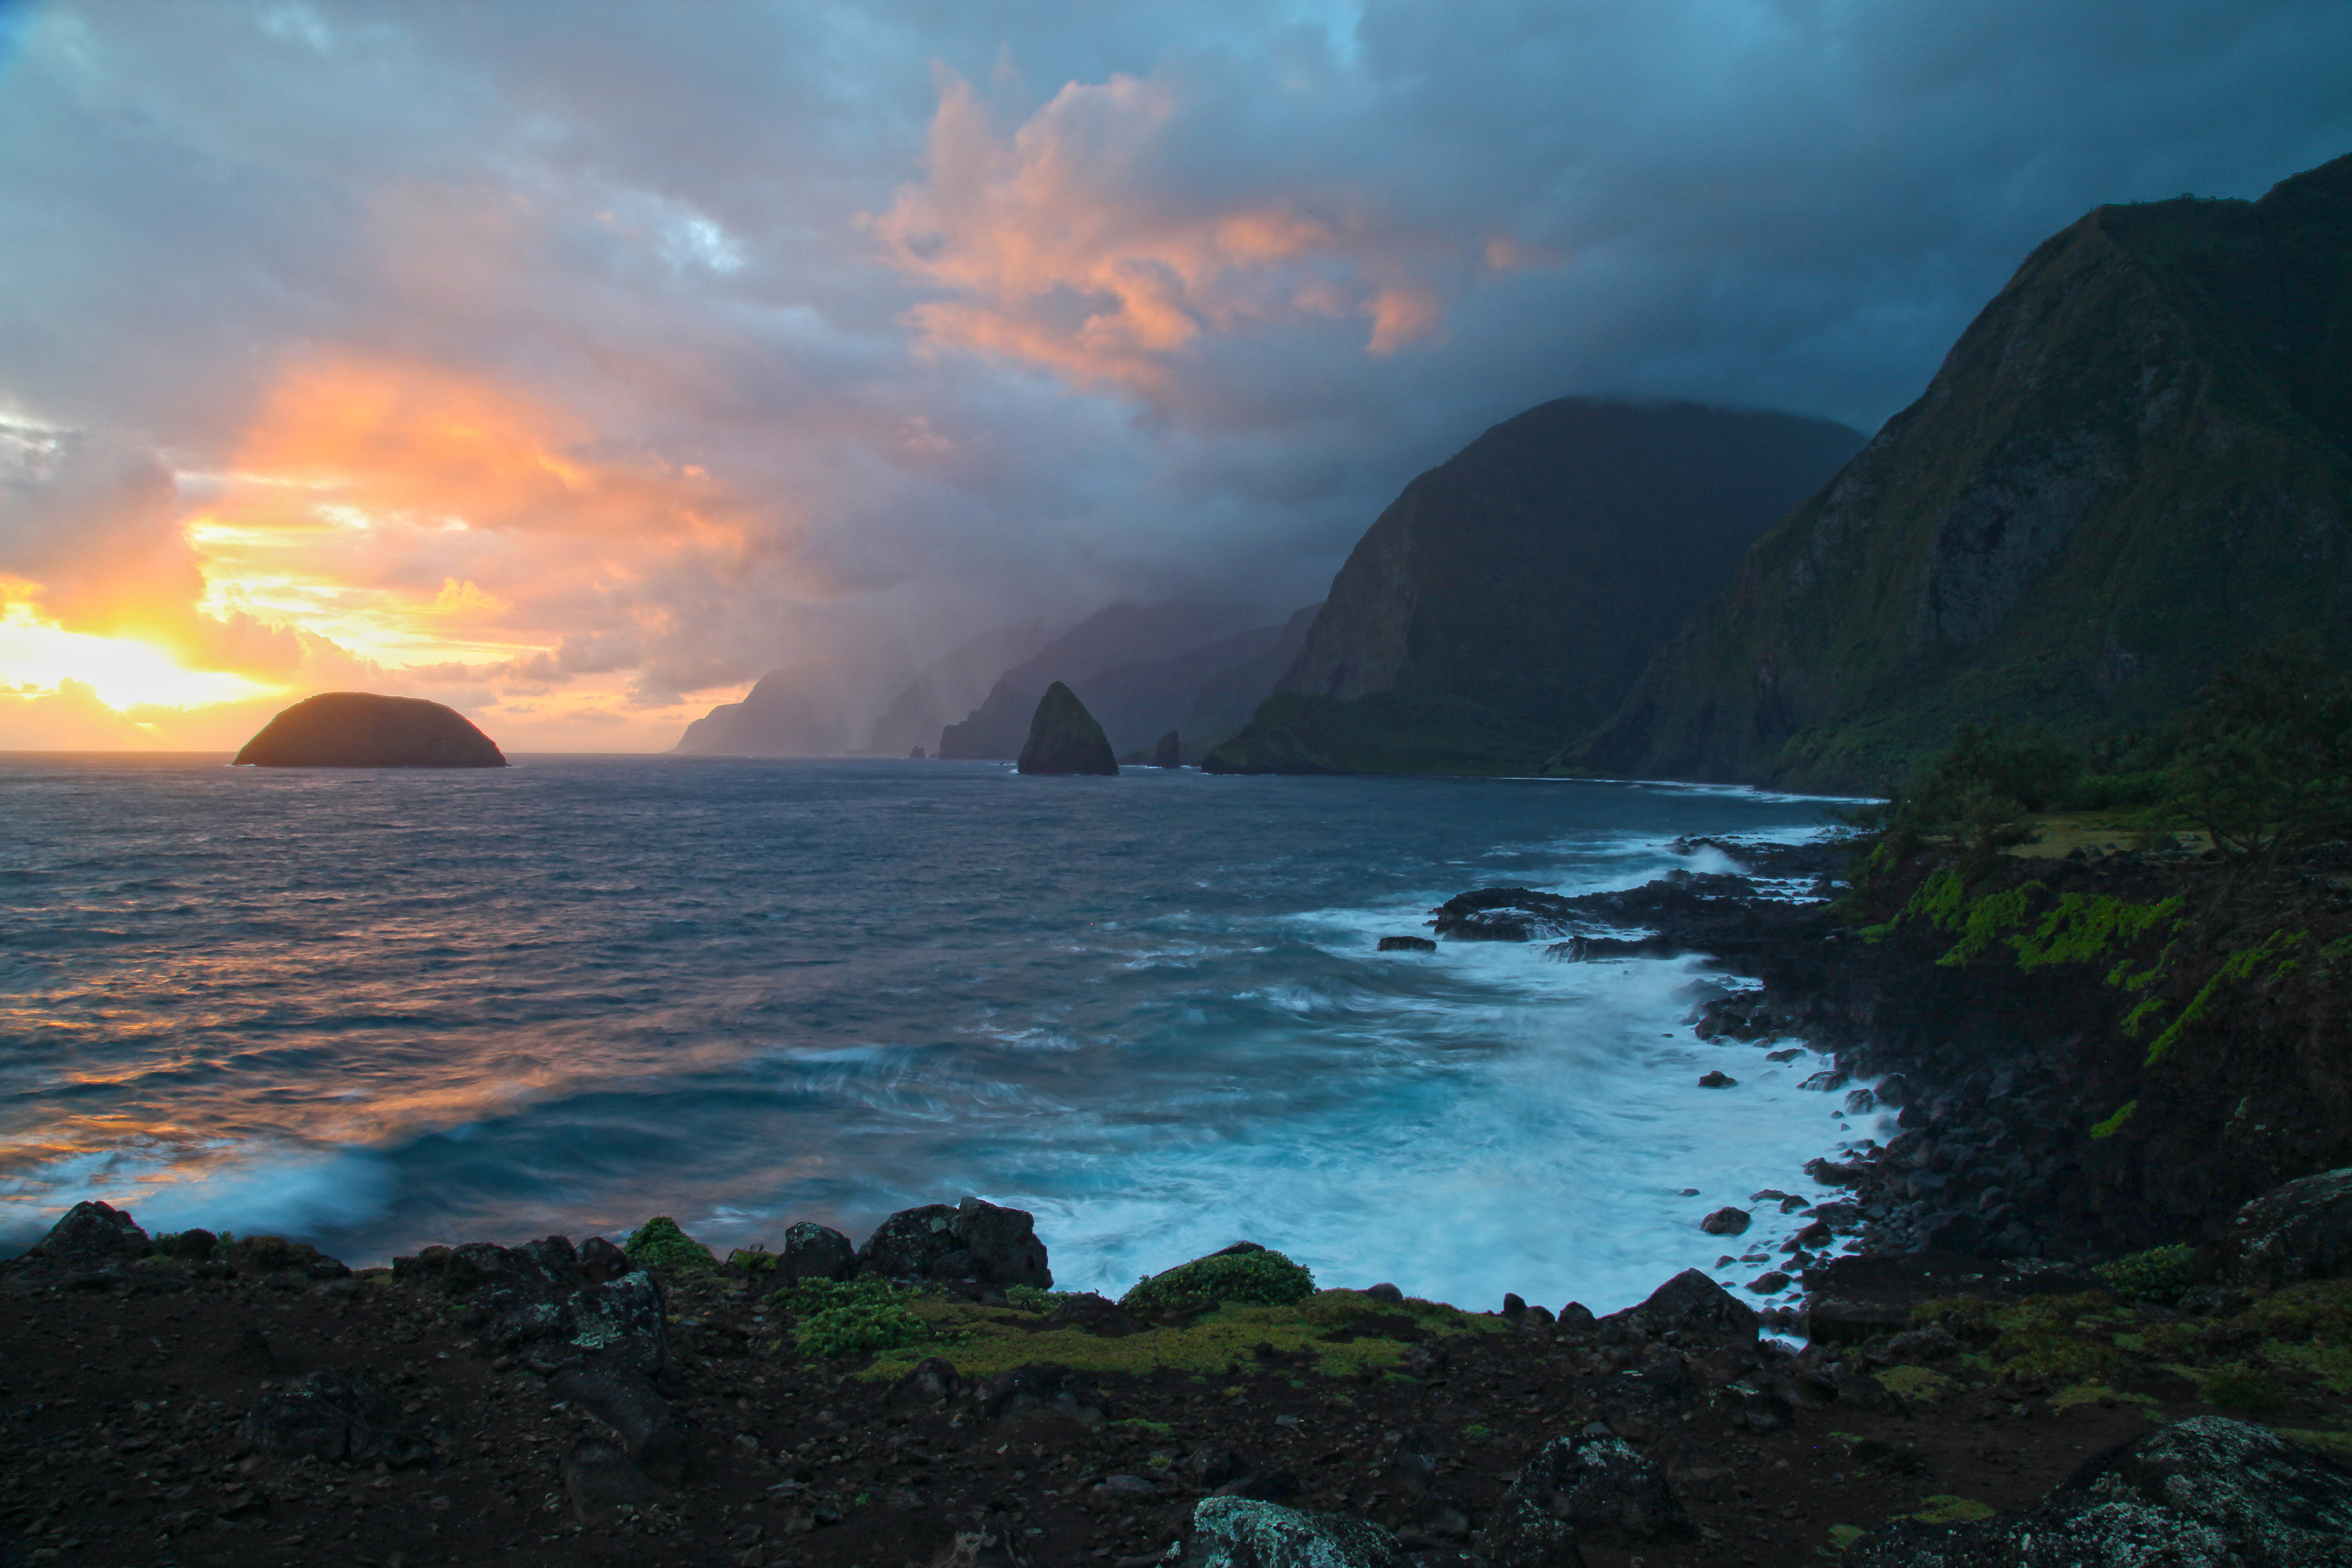 View of the sunrise over the north shore of Molokai